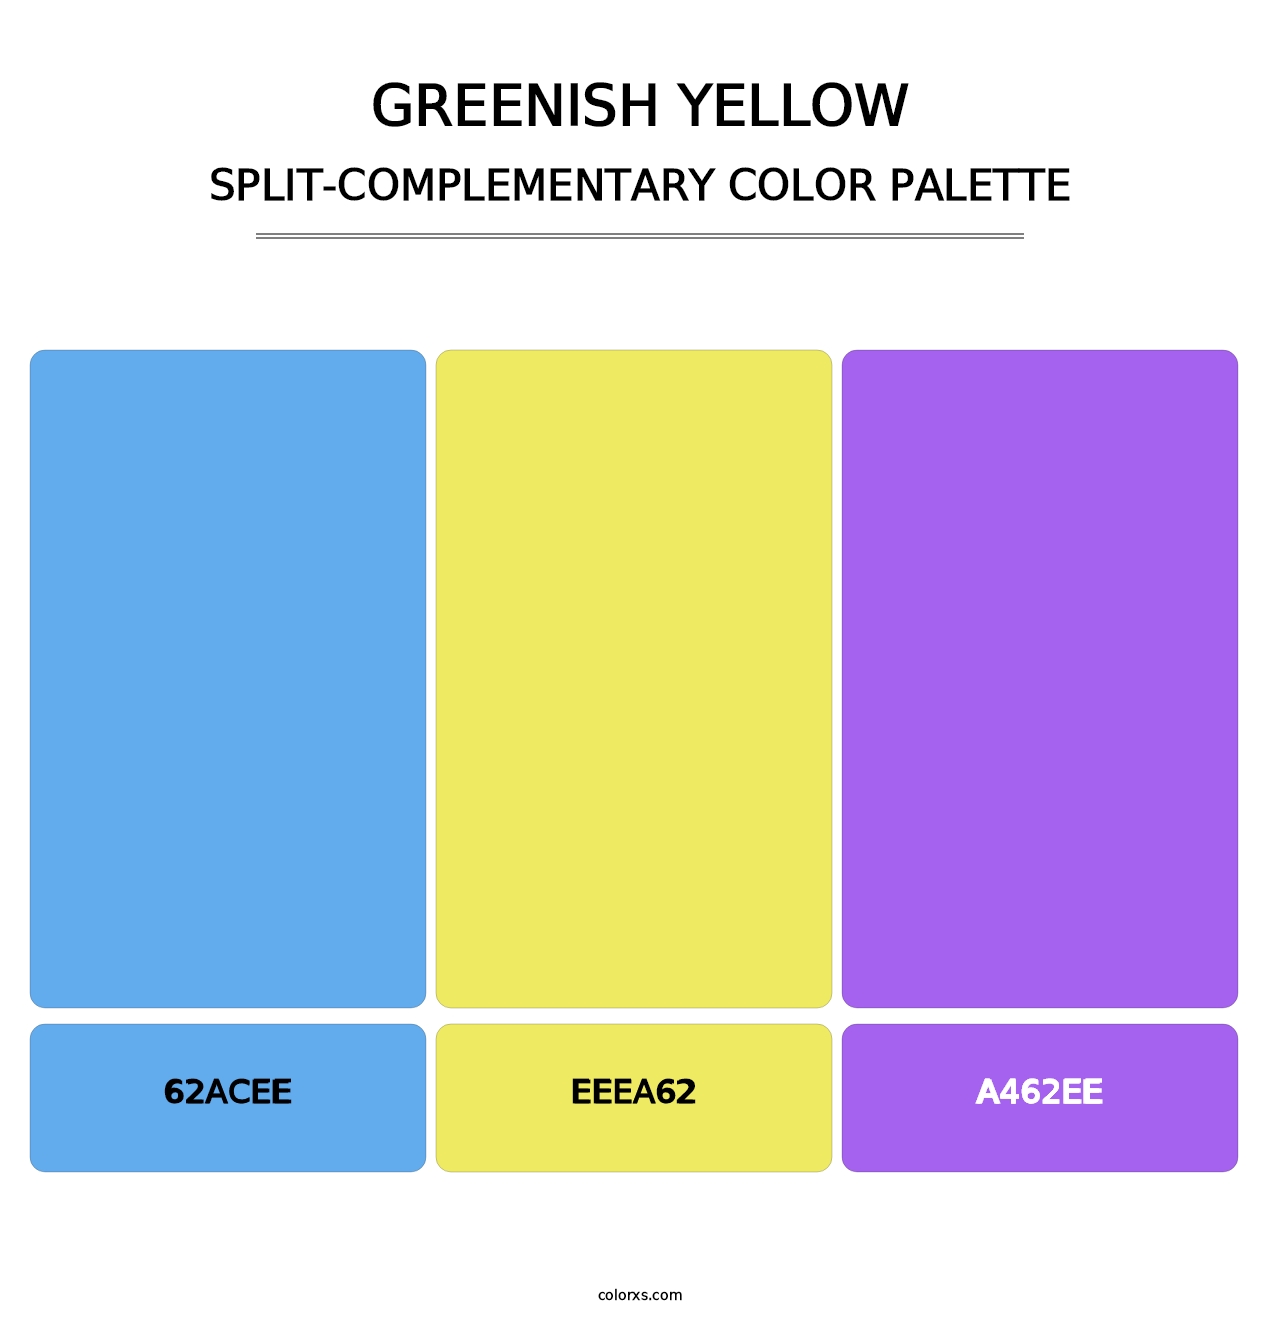 Greenish Yellow - Split-Complementary Color Palette